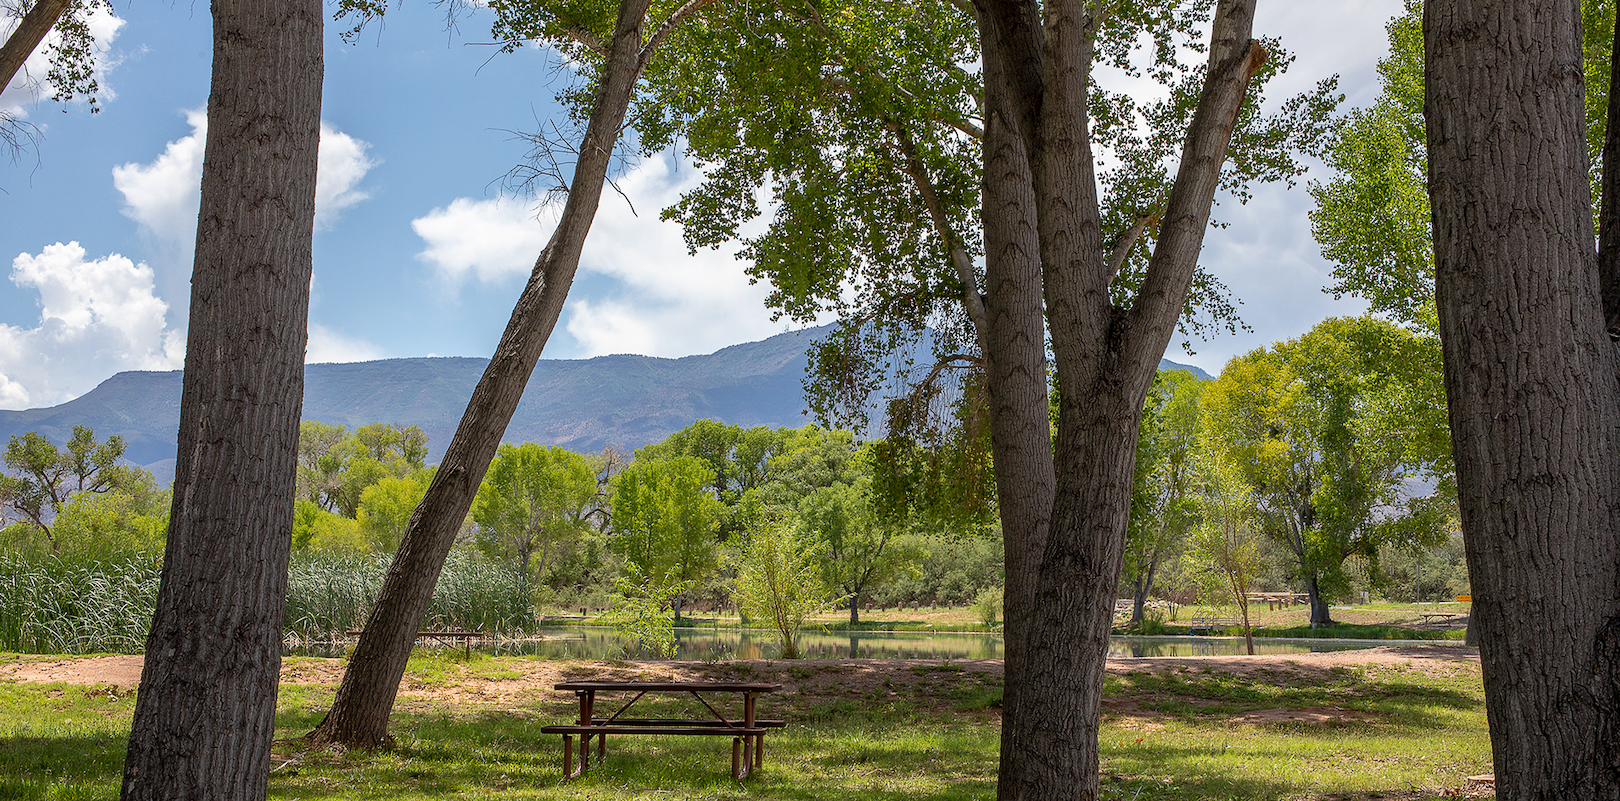 A picnic table shaded in the cottonwood trees with a mountain in the background